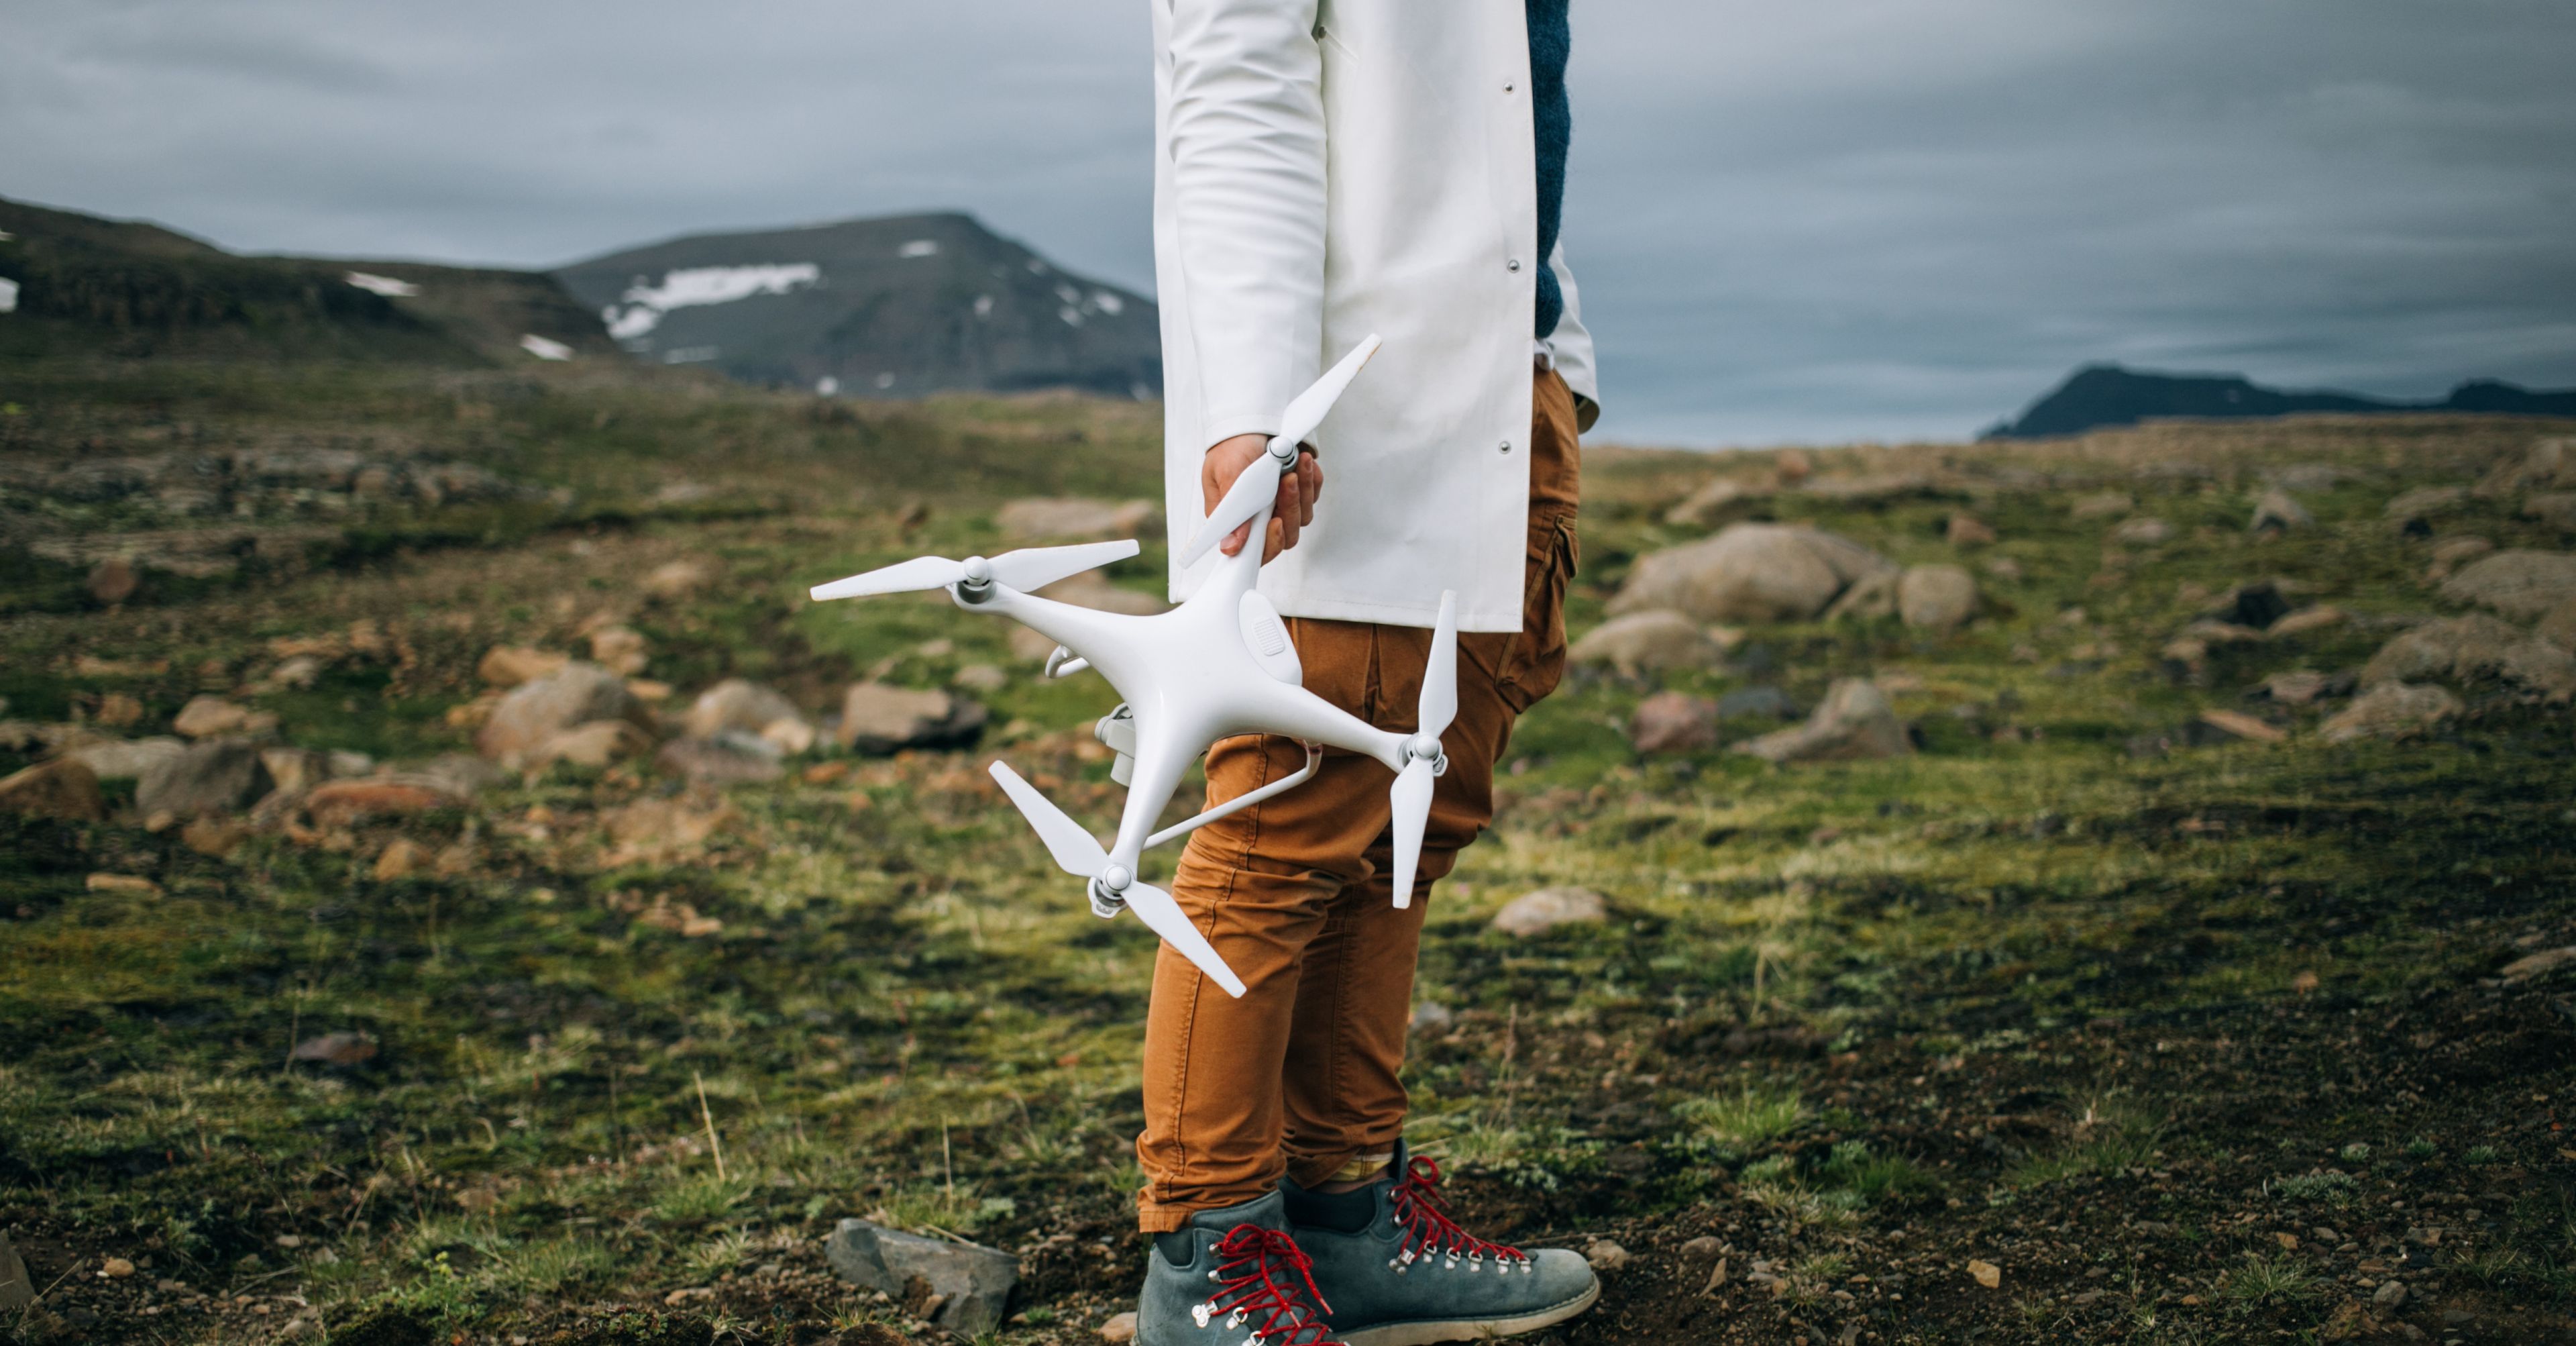 A man stands on a rocky surface in Iceland during an epic journey, holding a large professional drone.